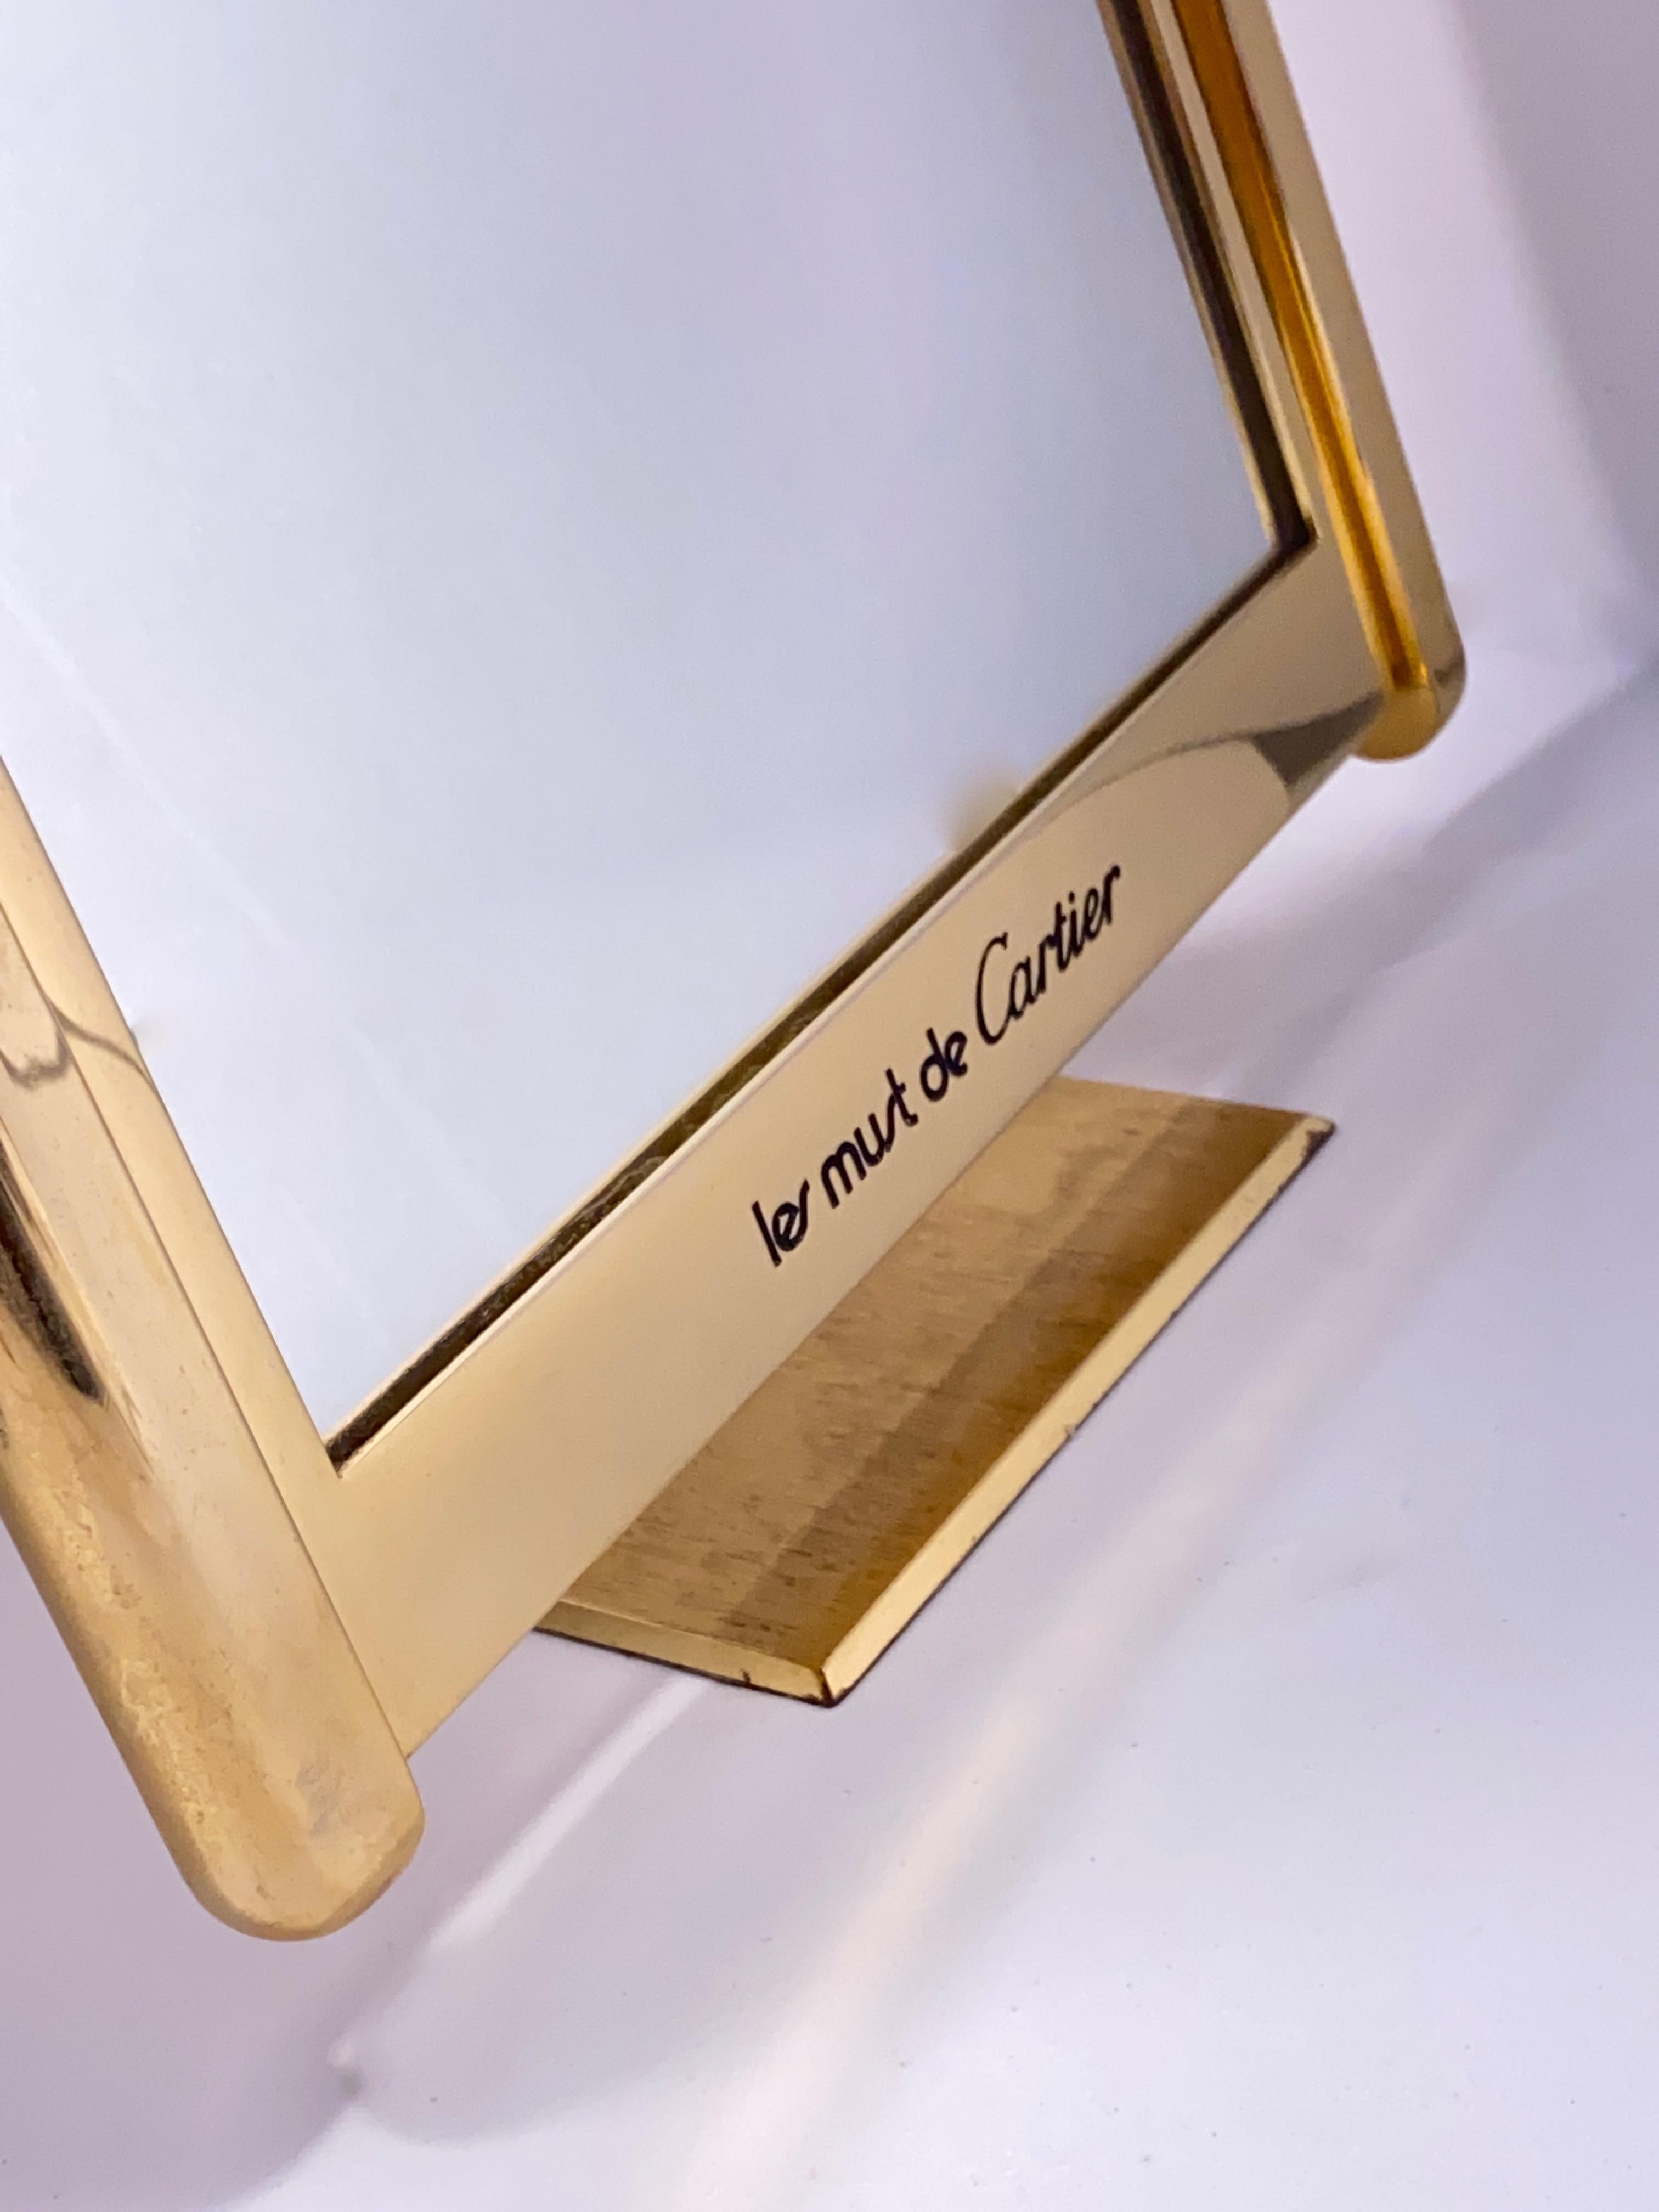 Vintage Cartier Classic Tank Pivotal Axis Table Mirror Gold-Plated, 1970 For Sale 2